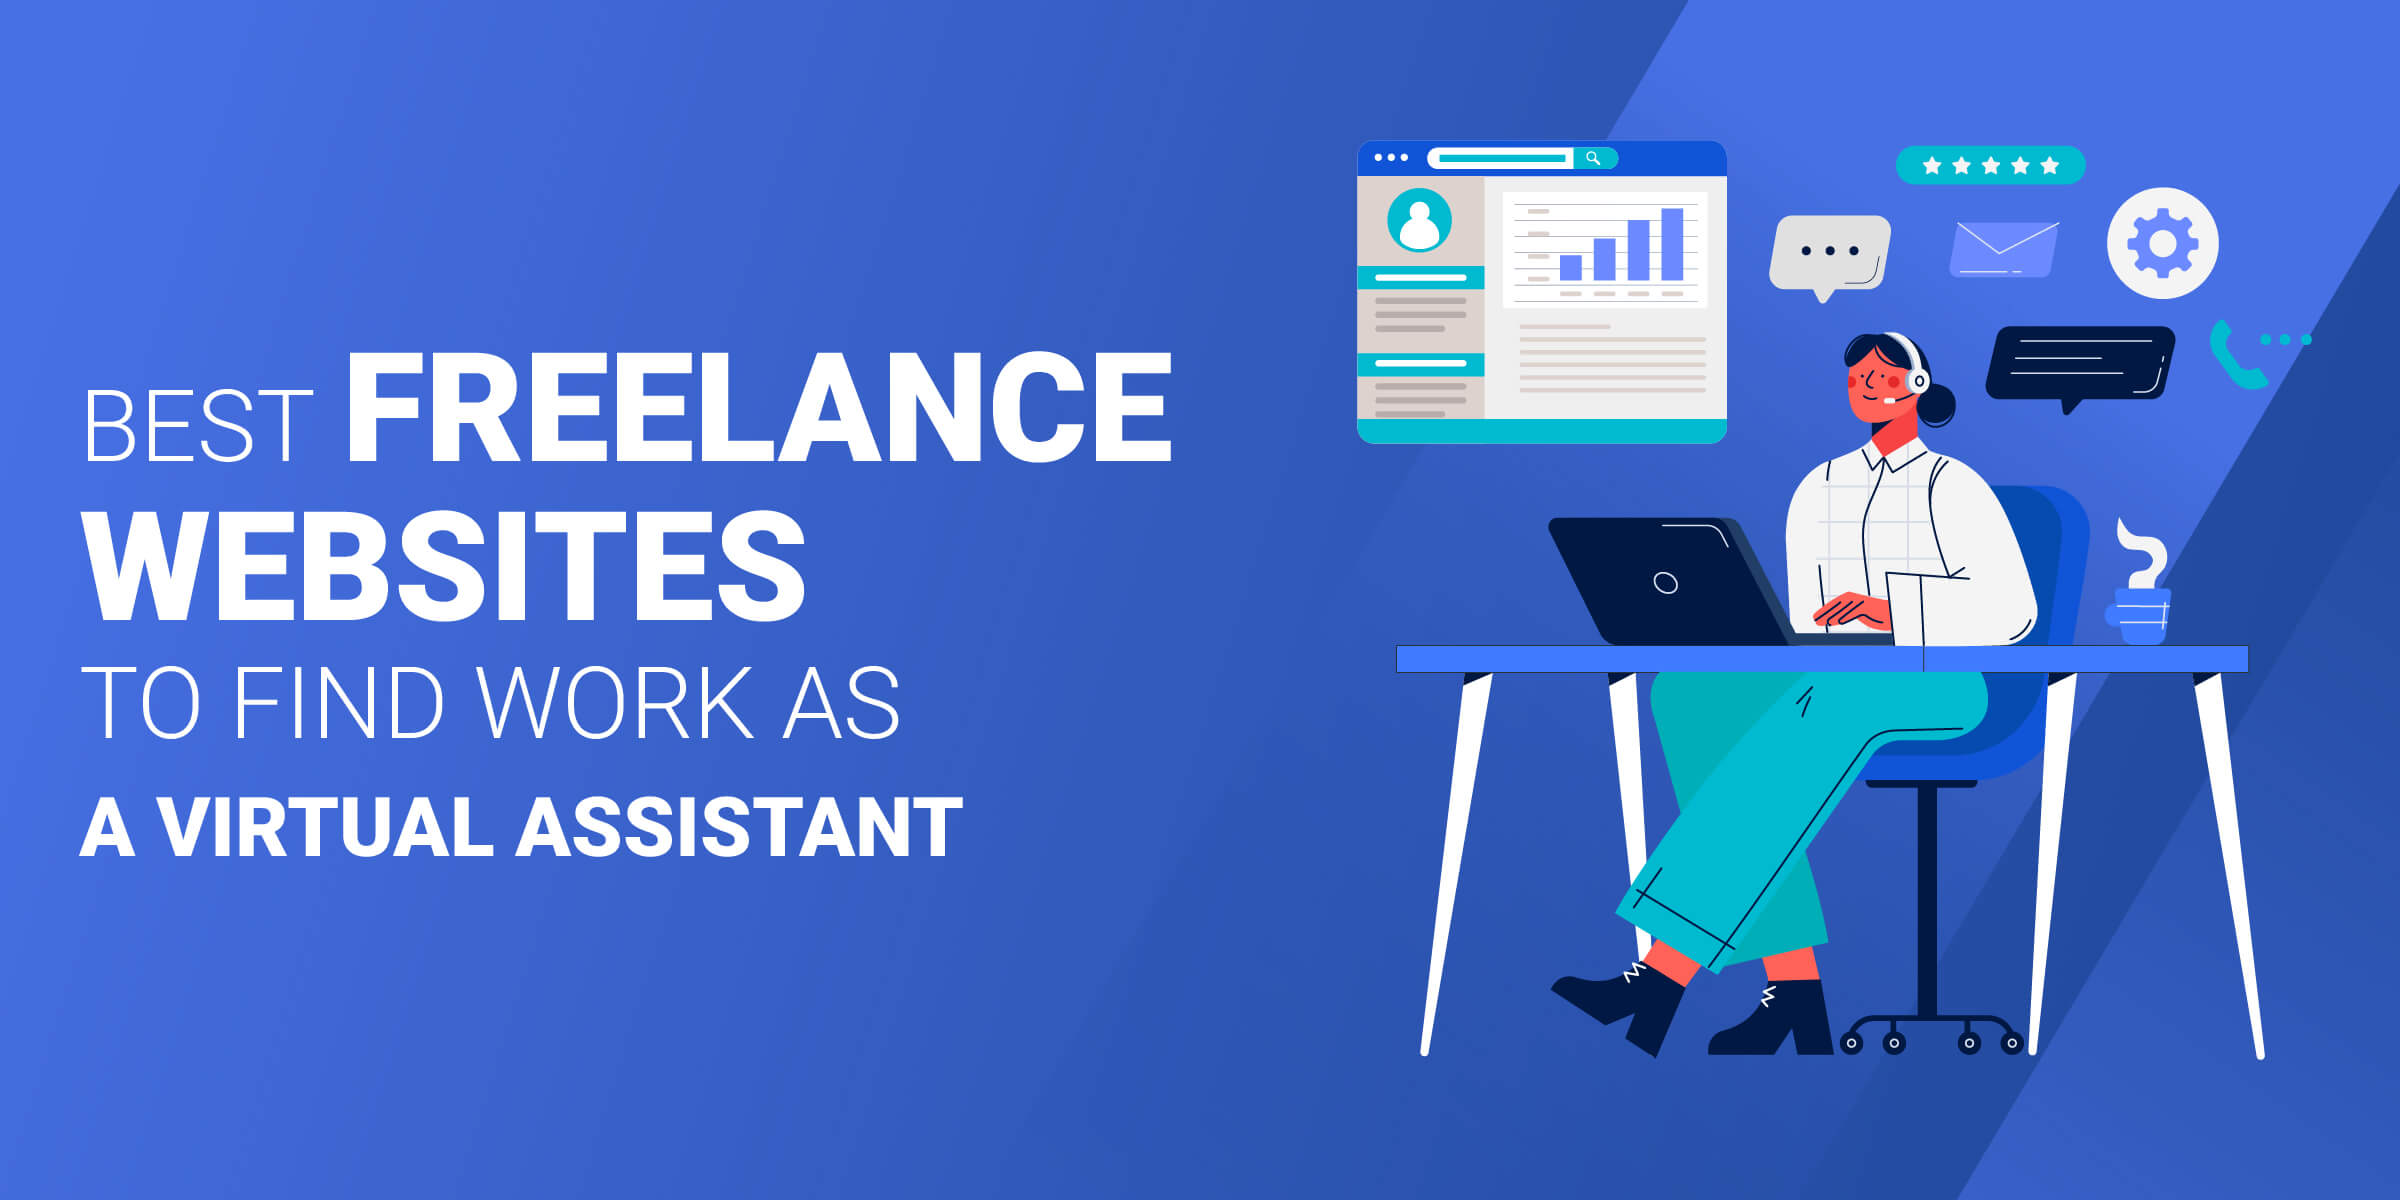 Best Freelance Websites to Find Work as Virtual Assistant